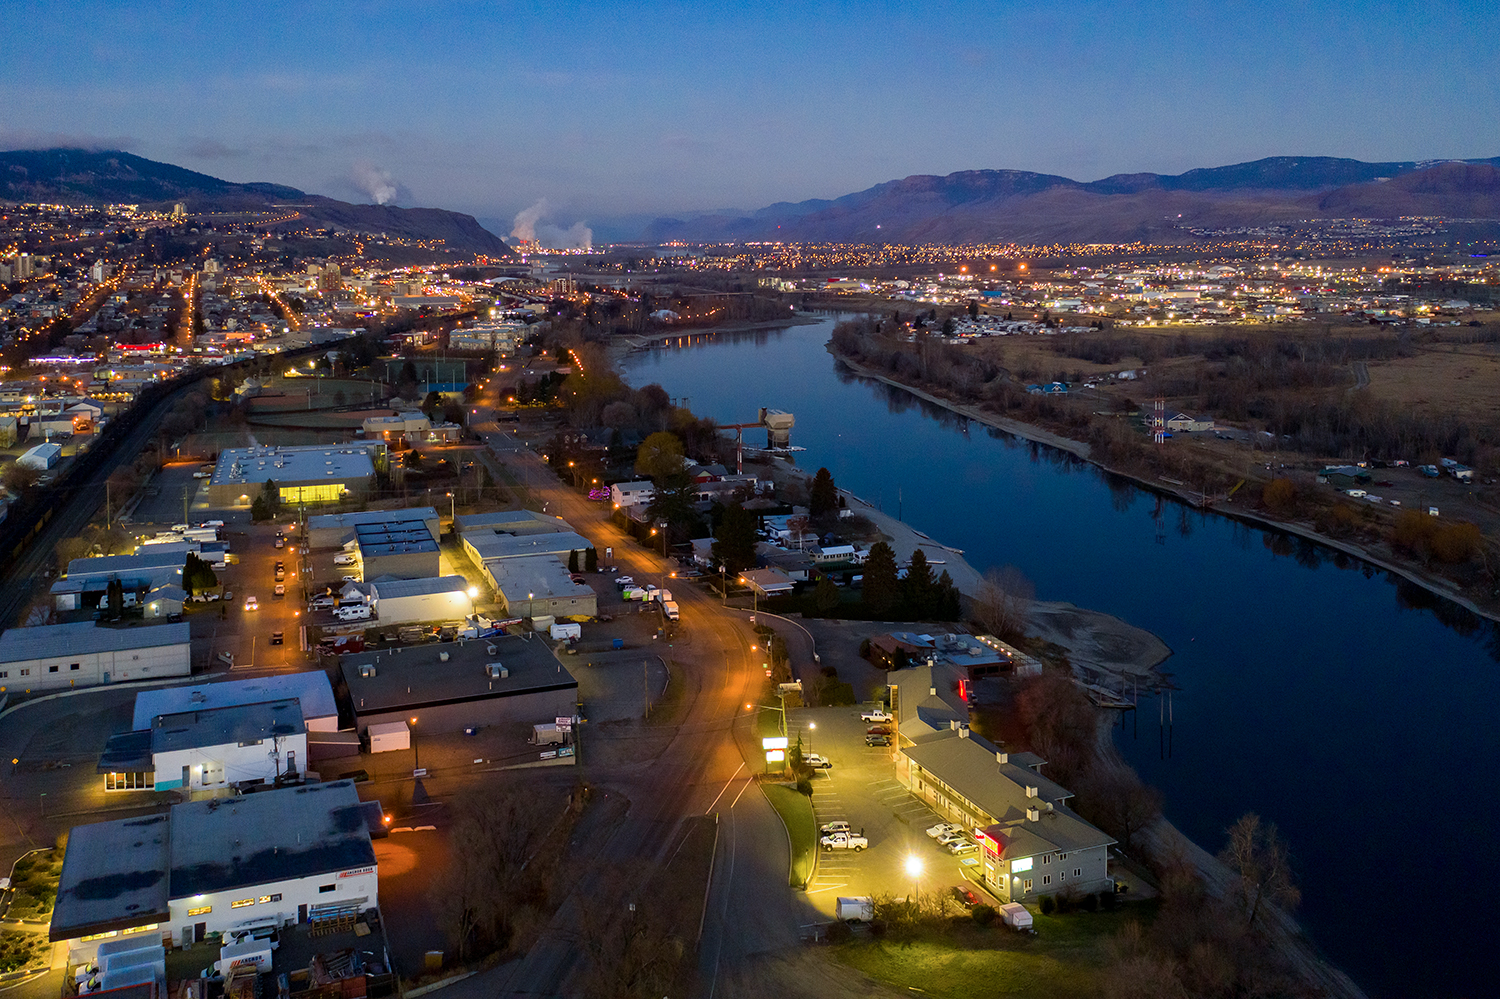 Kamloops City Aerial view of buildings and rivers with lights